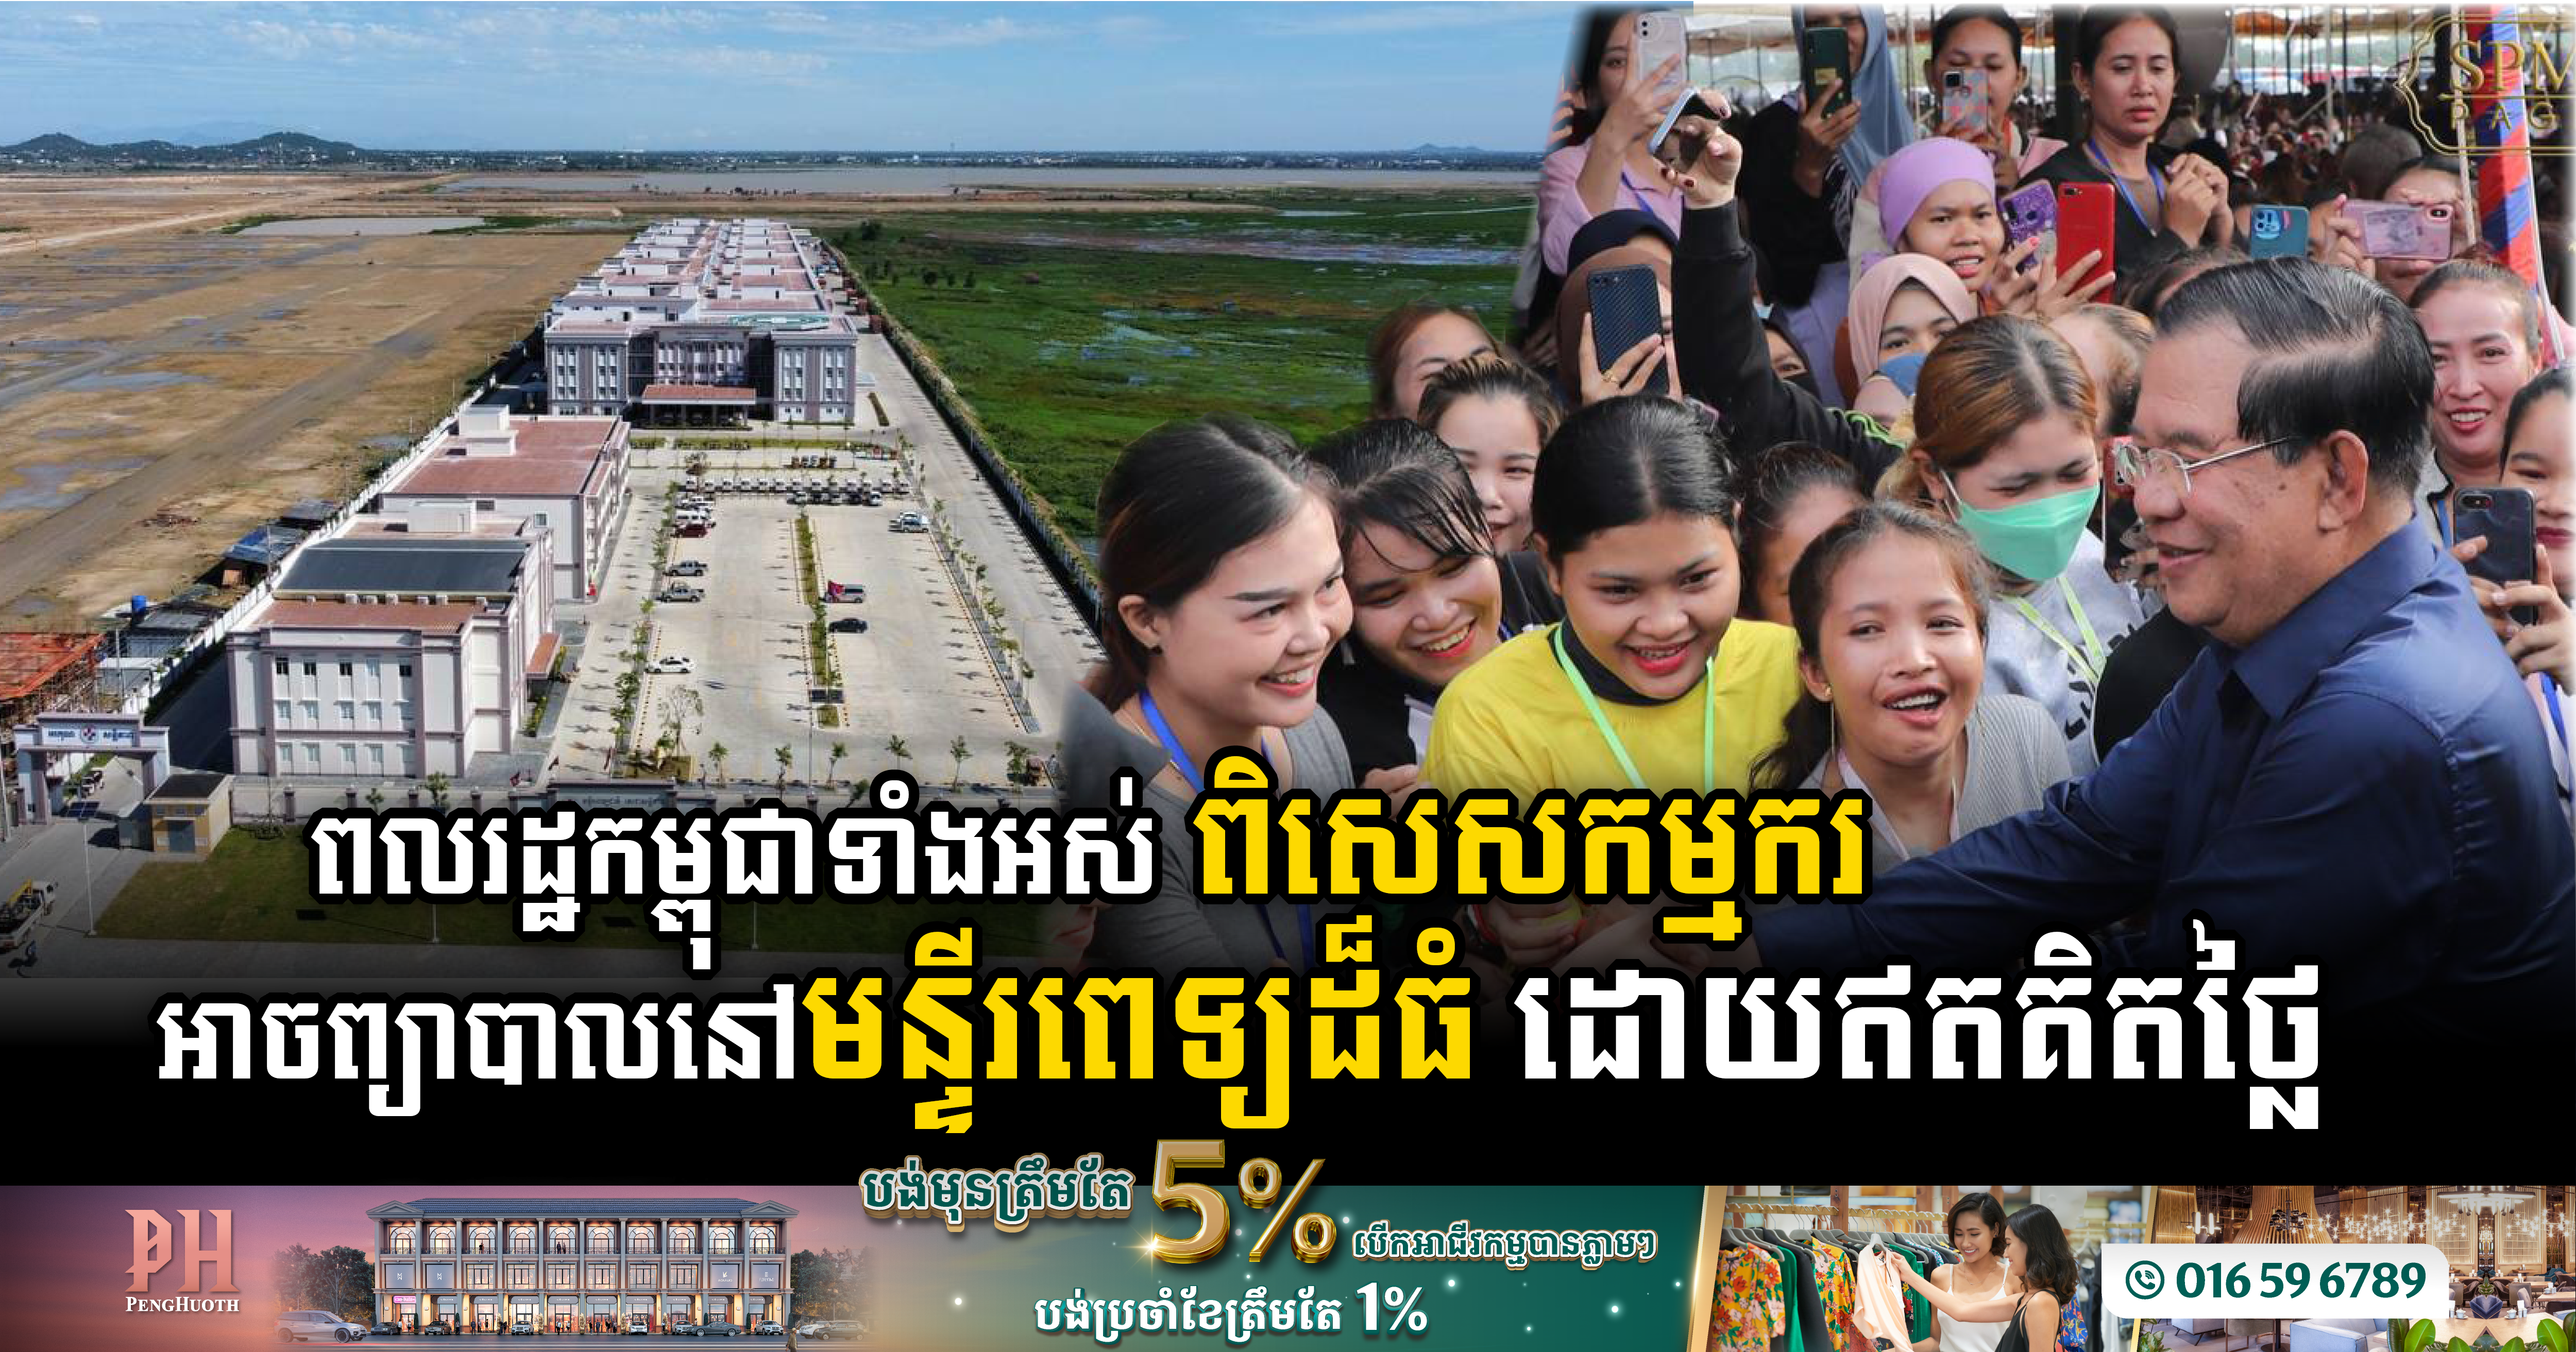 PM Announces Free Healthcare at Cambodia’s Largest Hospital for All Citizens, Especially Workers